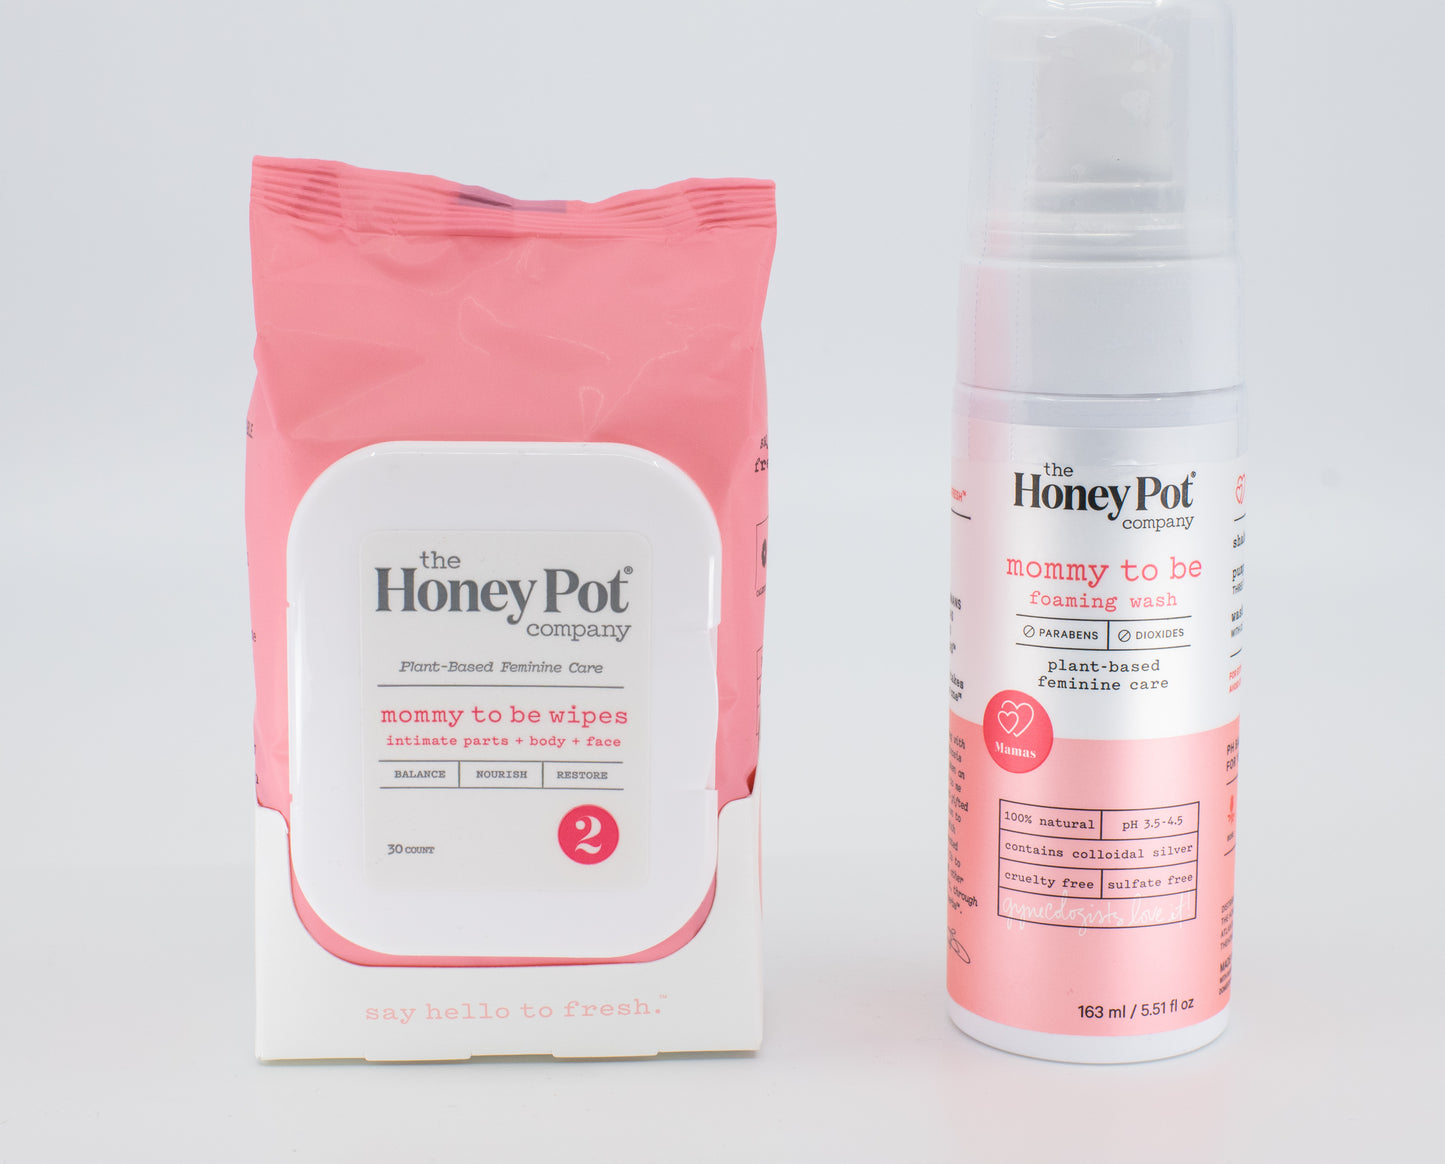 The Honey Pot mommy to be Wipes and Wash